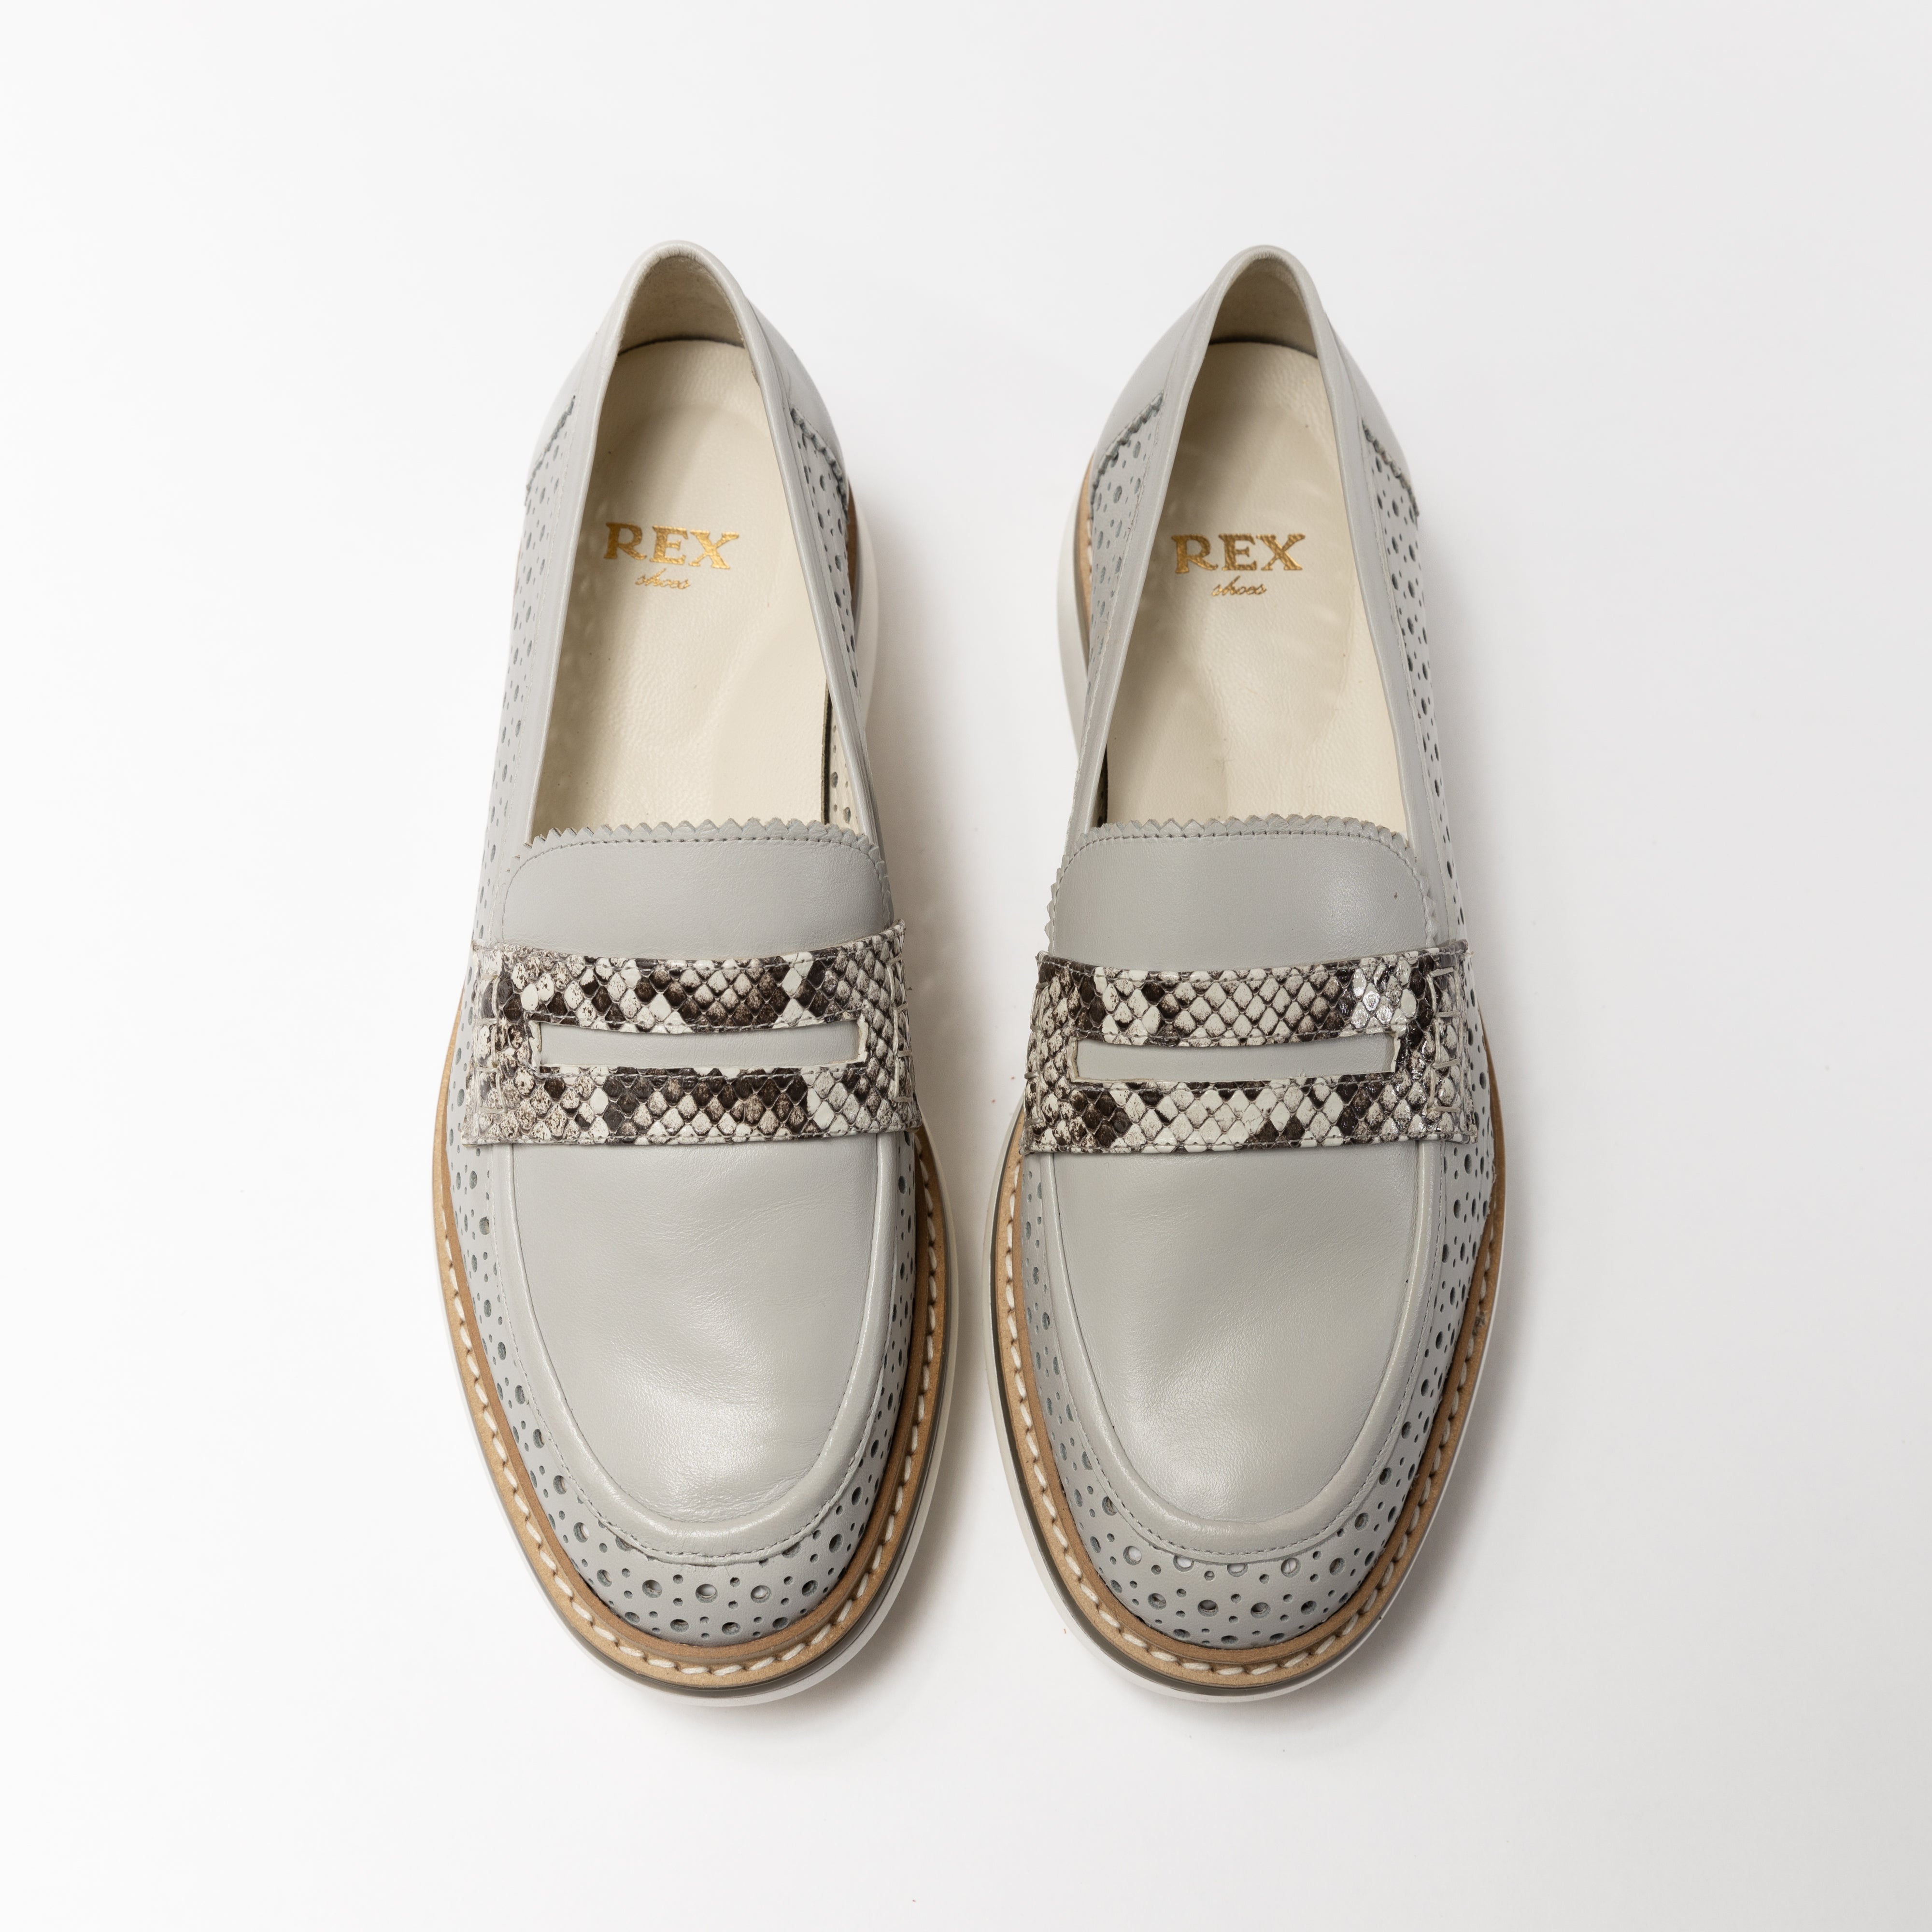 Top view of the Rex x Inversa Marcie Loafer in perforated lambskin with a distinctive non-perforated vamp, accented by a unique Inversa python penny strap, complete with a single light brown natural salpa welt and a lightweight TPU outsole, all handcrafted in Spain.